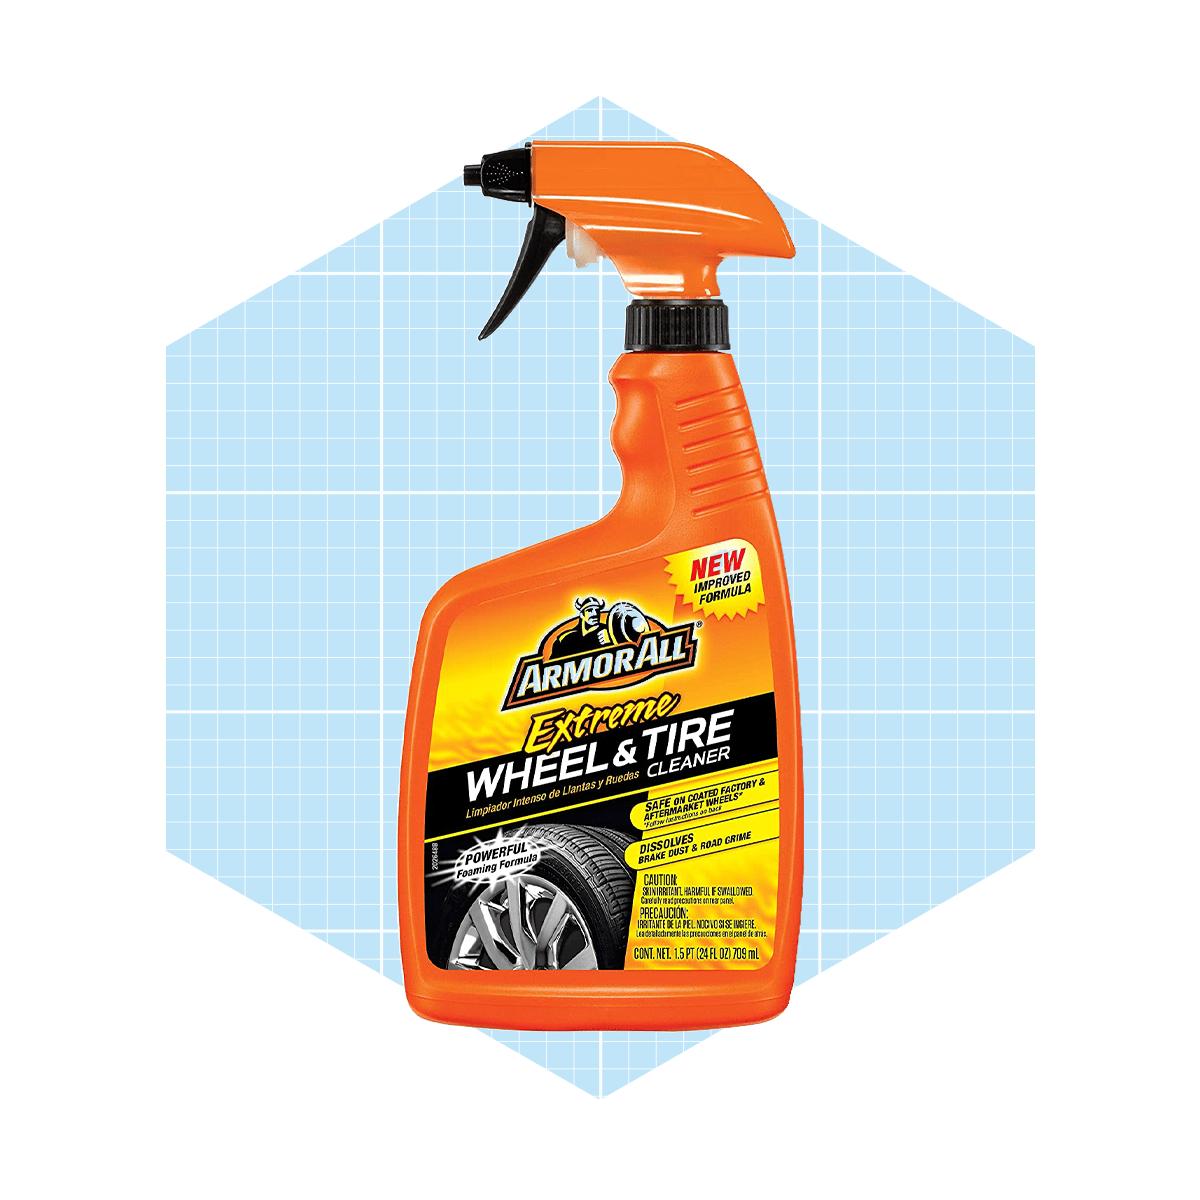 https://www.familyhandyman.com/wp-content/uploads/2021/03/extreme-wheel-and-tire-cleaner-ecomm-via-amazon.com_.png?fit=700%2C700